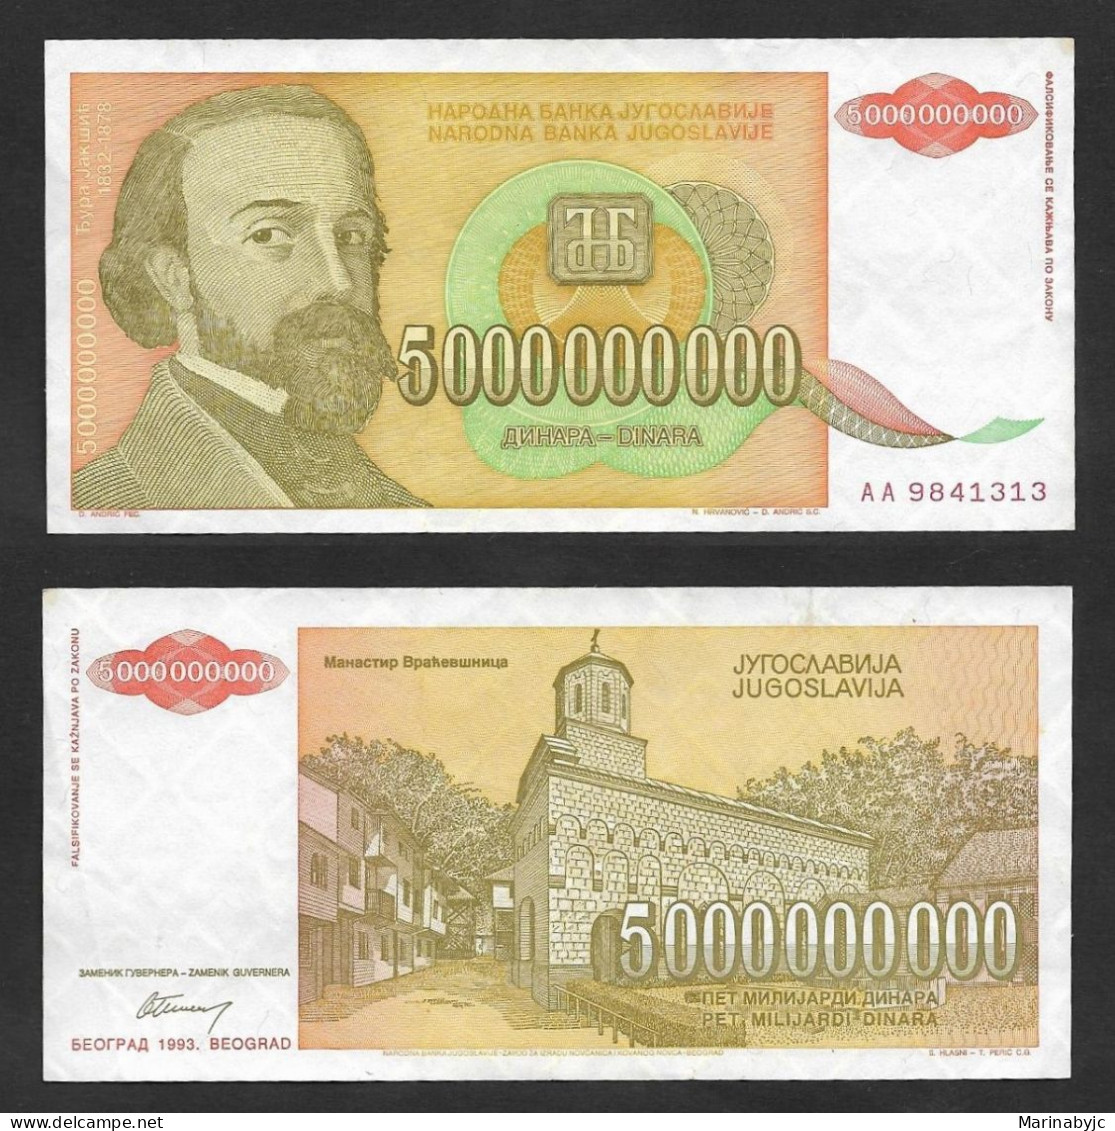 SE)1993 YUGOSLAVIA, BANKNOTE OF 5,00,000,000 DINARS OF THE CENTRAL BANK OF YUGOSLAVIA, WITH REVERSE, VF - Used Stamps